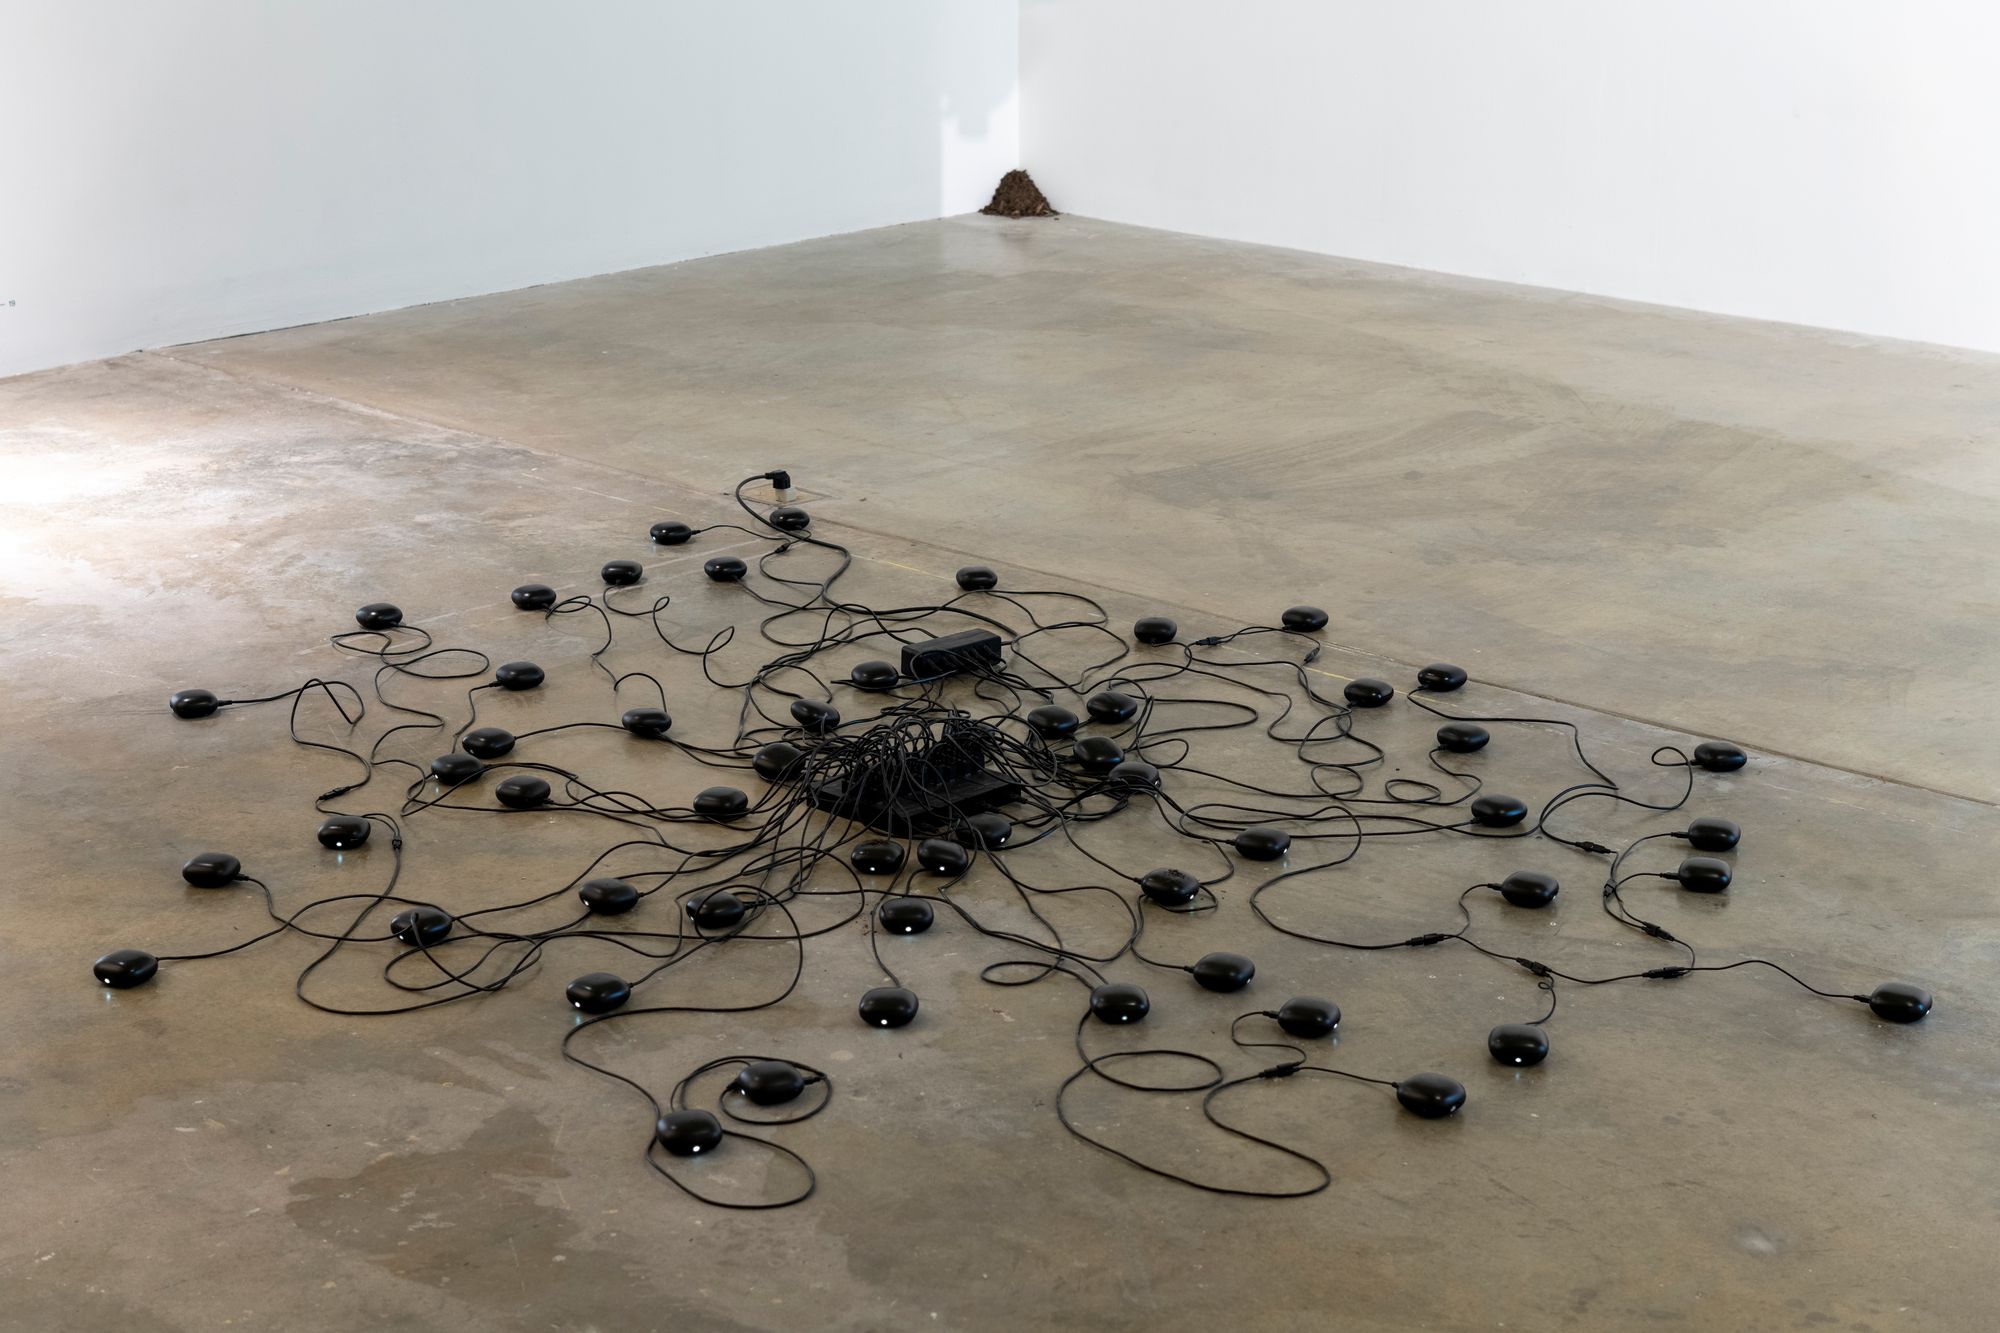 A tangled web of black devices and their cords expanding from the center of the floor in an exhibition space.